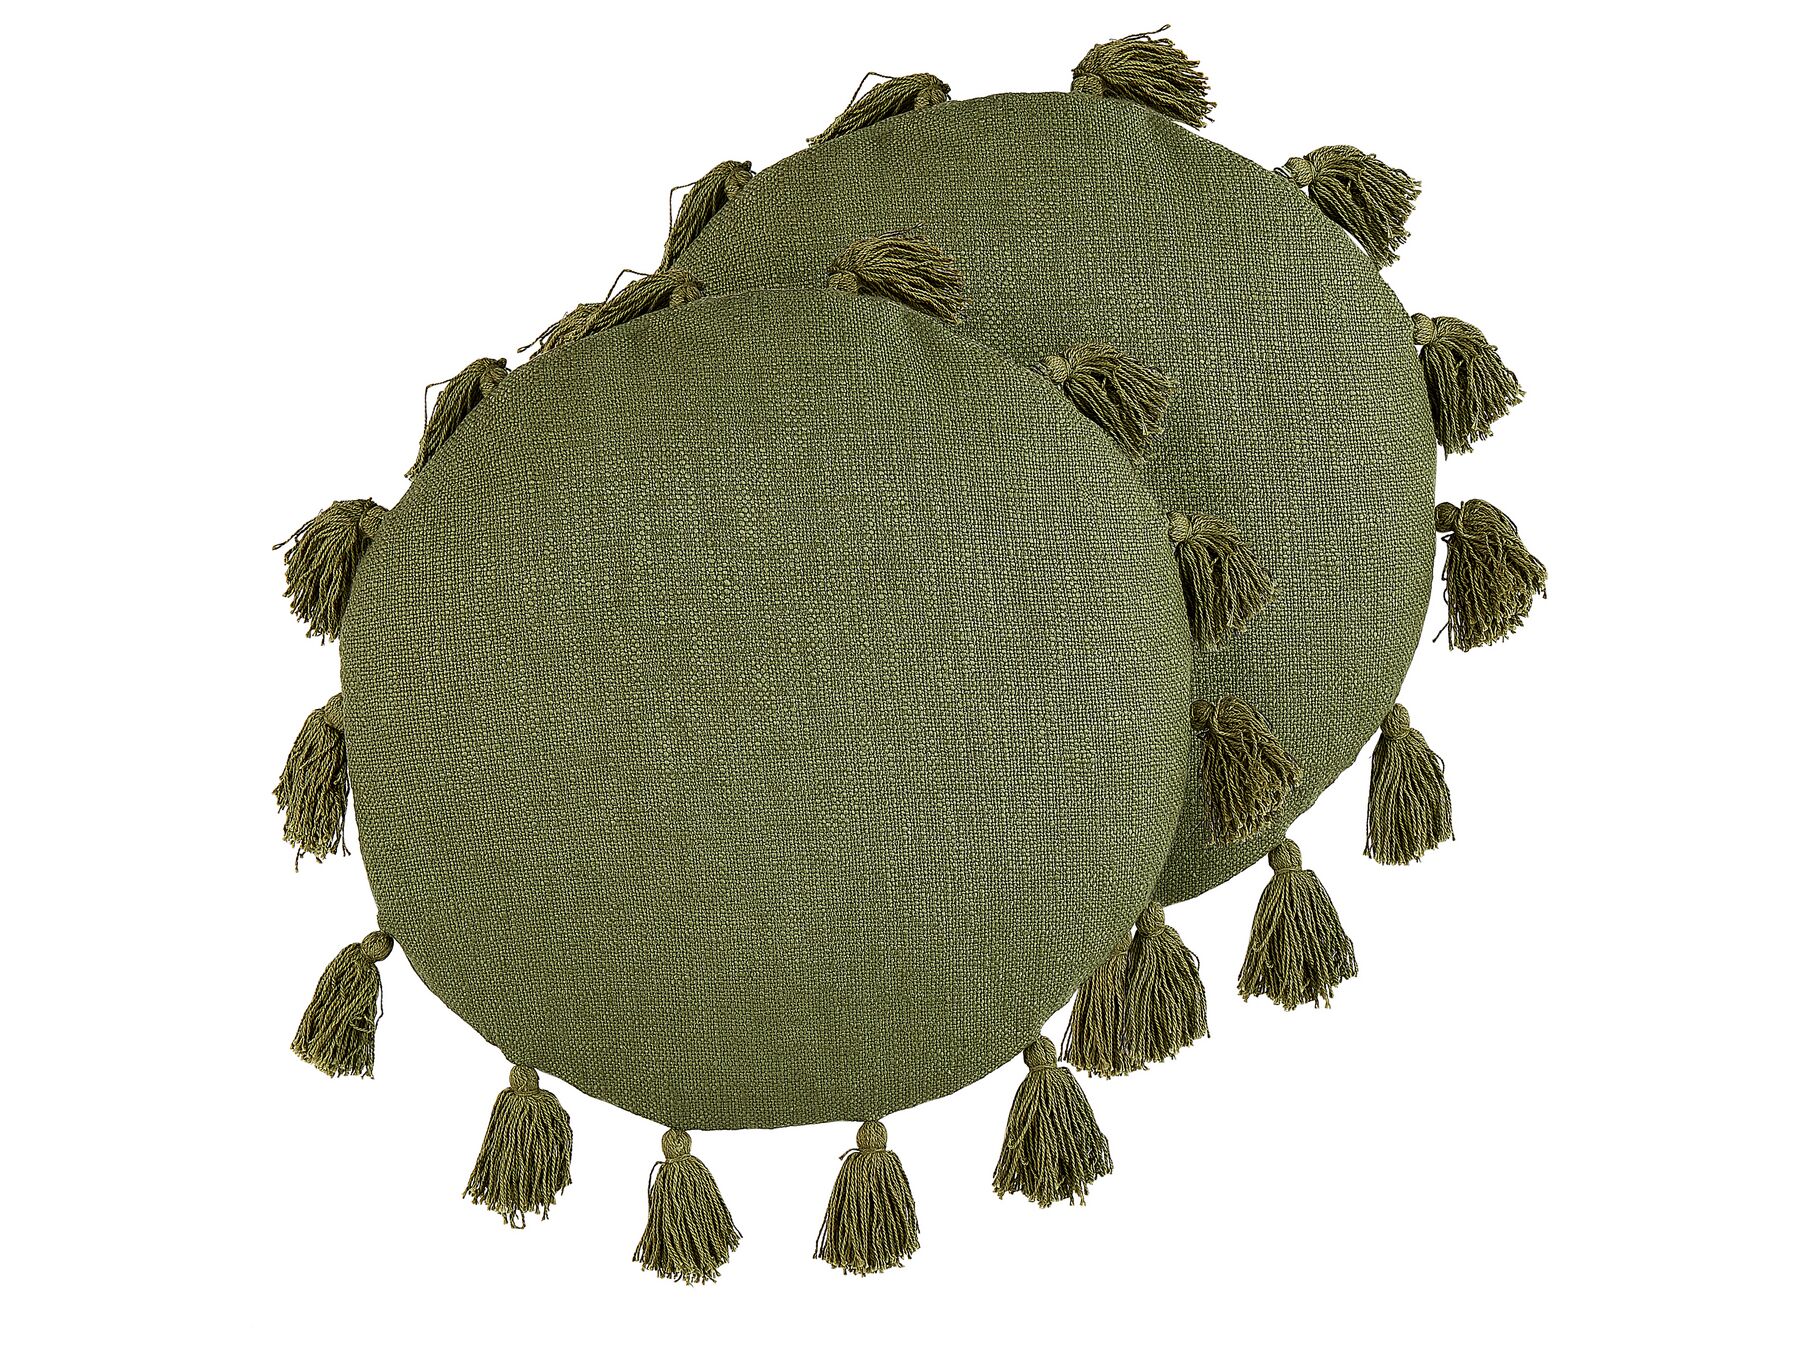 Set of 2 Cotton Cushions with Tassels ⌀ 45 cm Green MADIA_903813